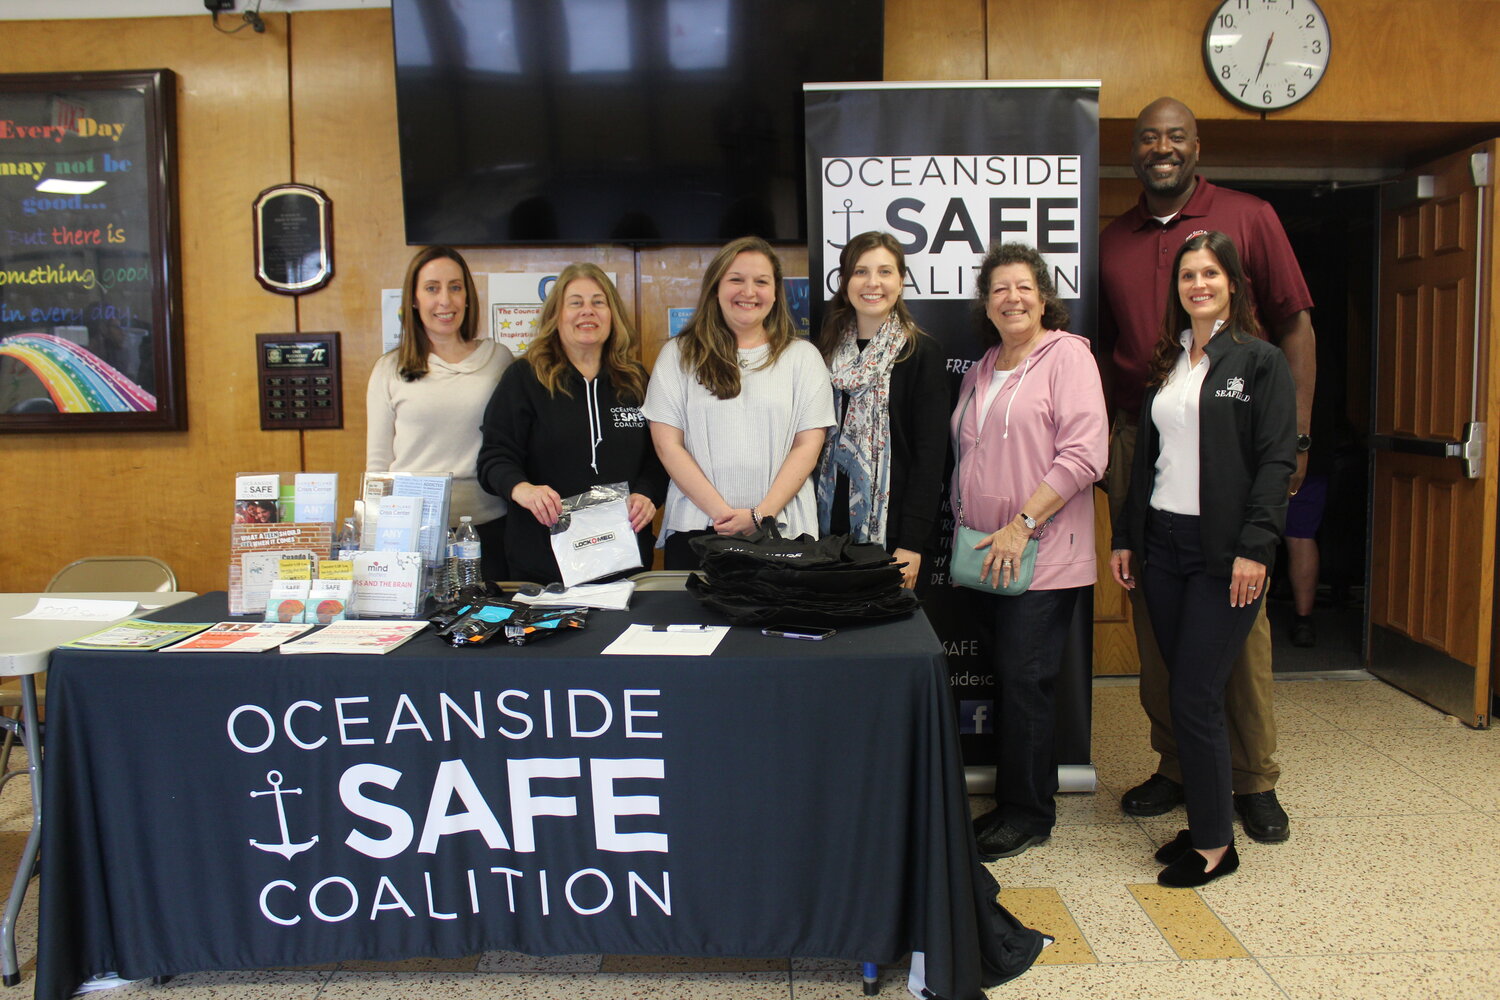 The Oceanside SAFE Coalition invited Jermaine Galloway, or ‘Tall Cop Says Stop’ to Oceanside High School to teach drug awareness and prevention, including all the nuances of legal synthetic drugs, elaborate hiding places in common household objects and strategies talking to teens.